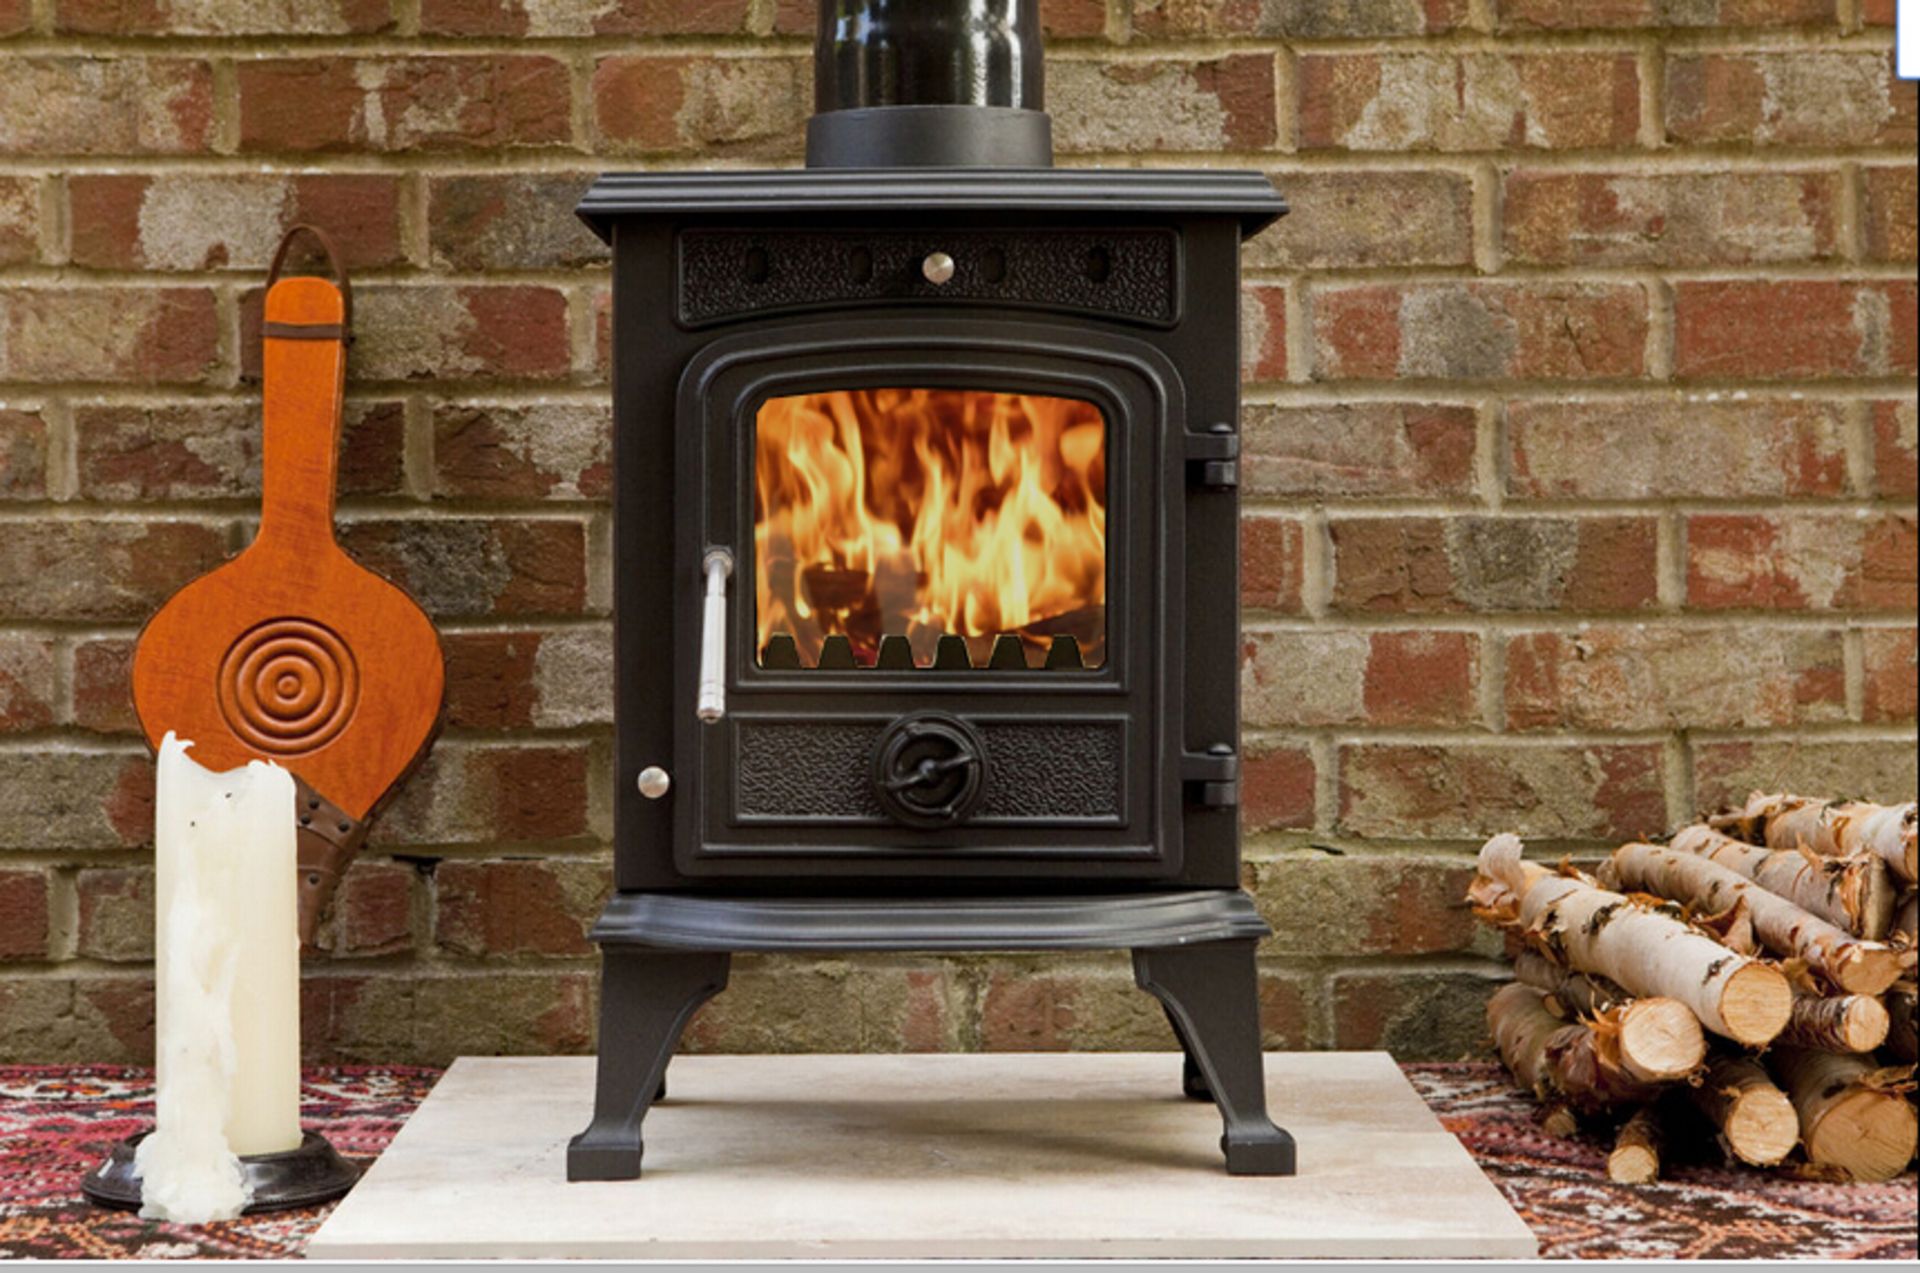 4.5KW BRAND NEW CRATED CAST IRON MULTI FUEL WOOD BURNING STOVE